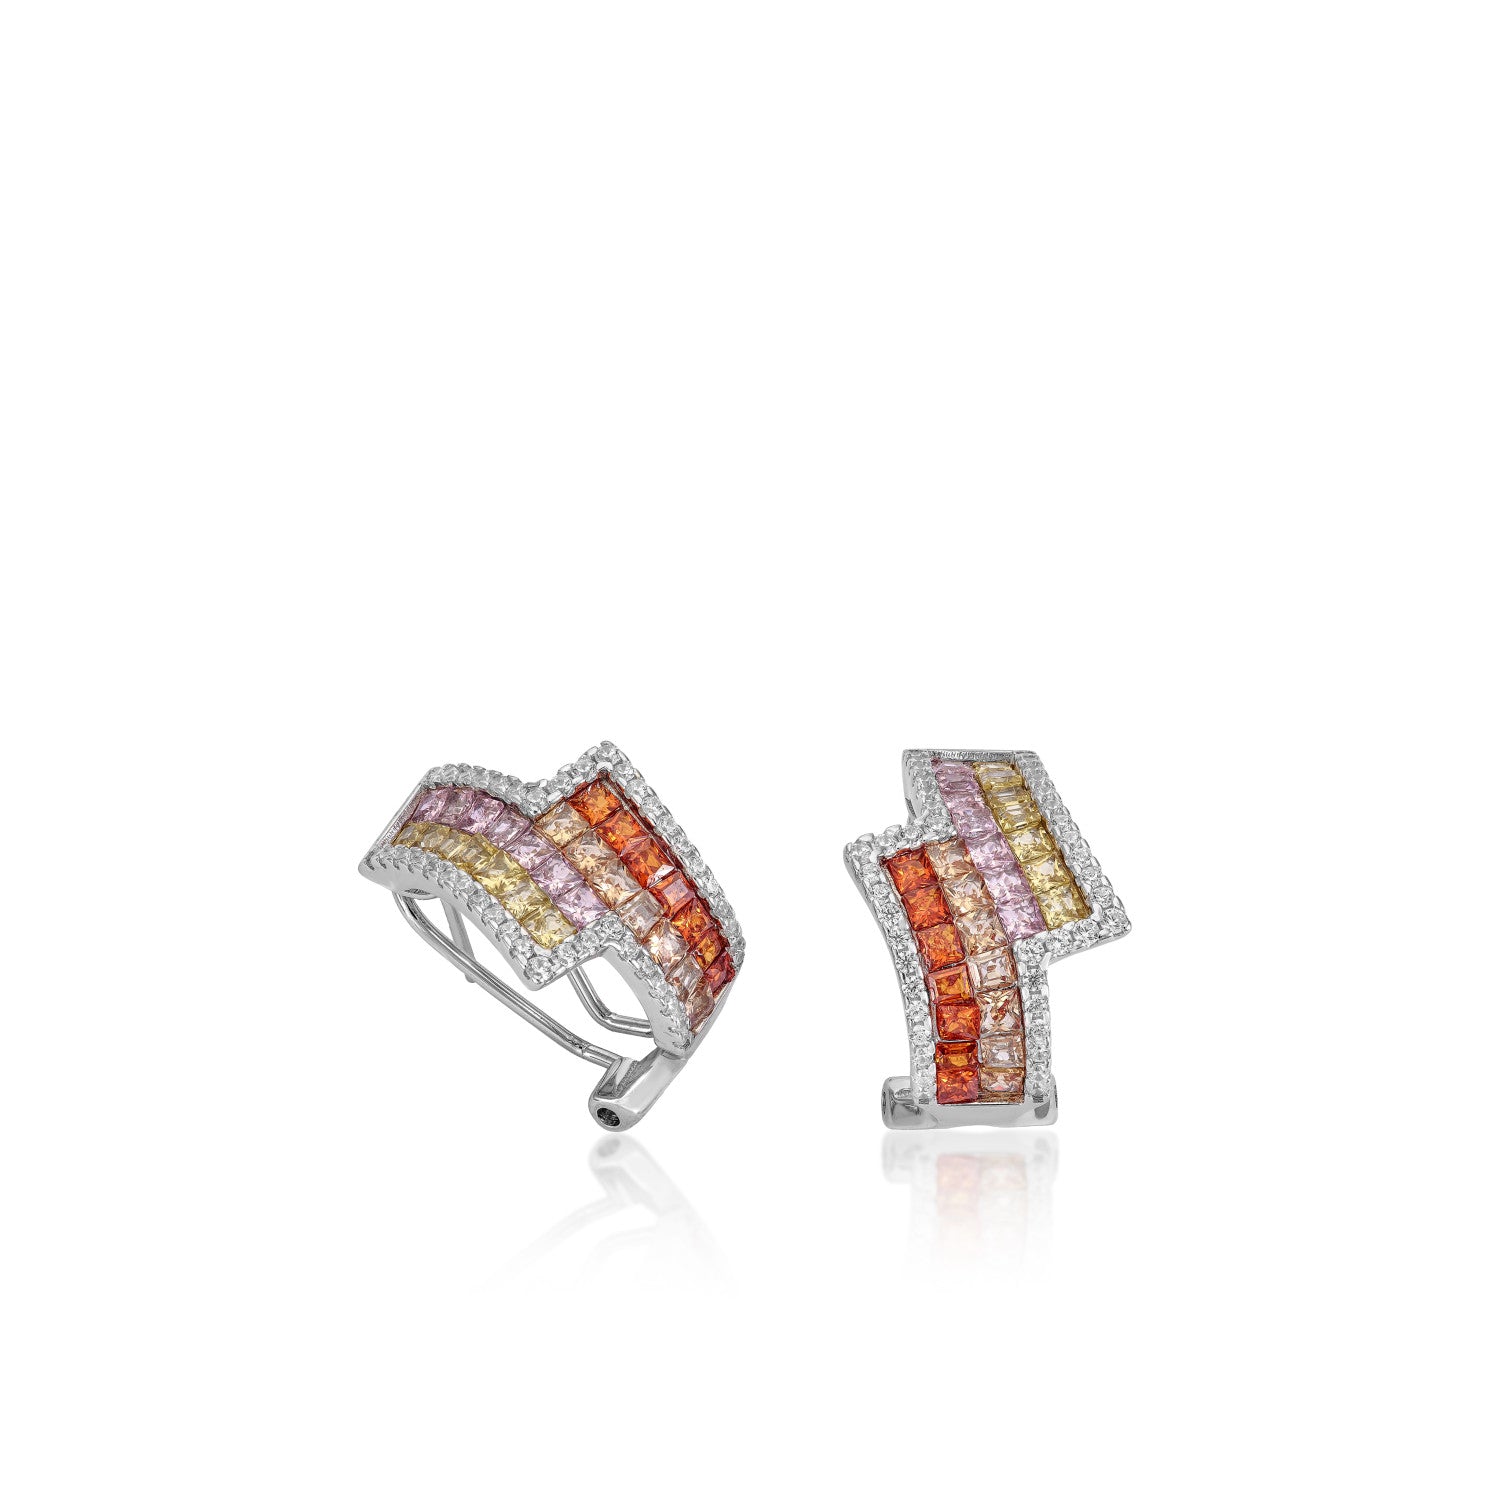 Earrings omega clasp with uneven design in warm tones